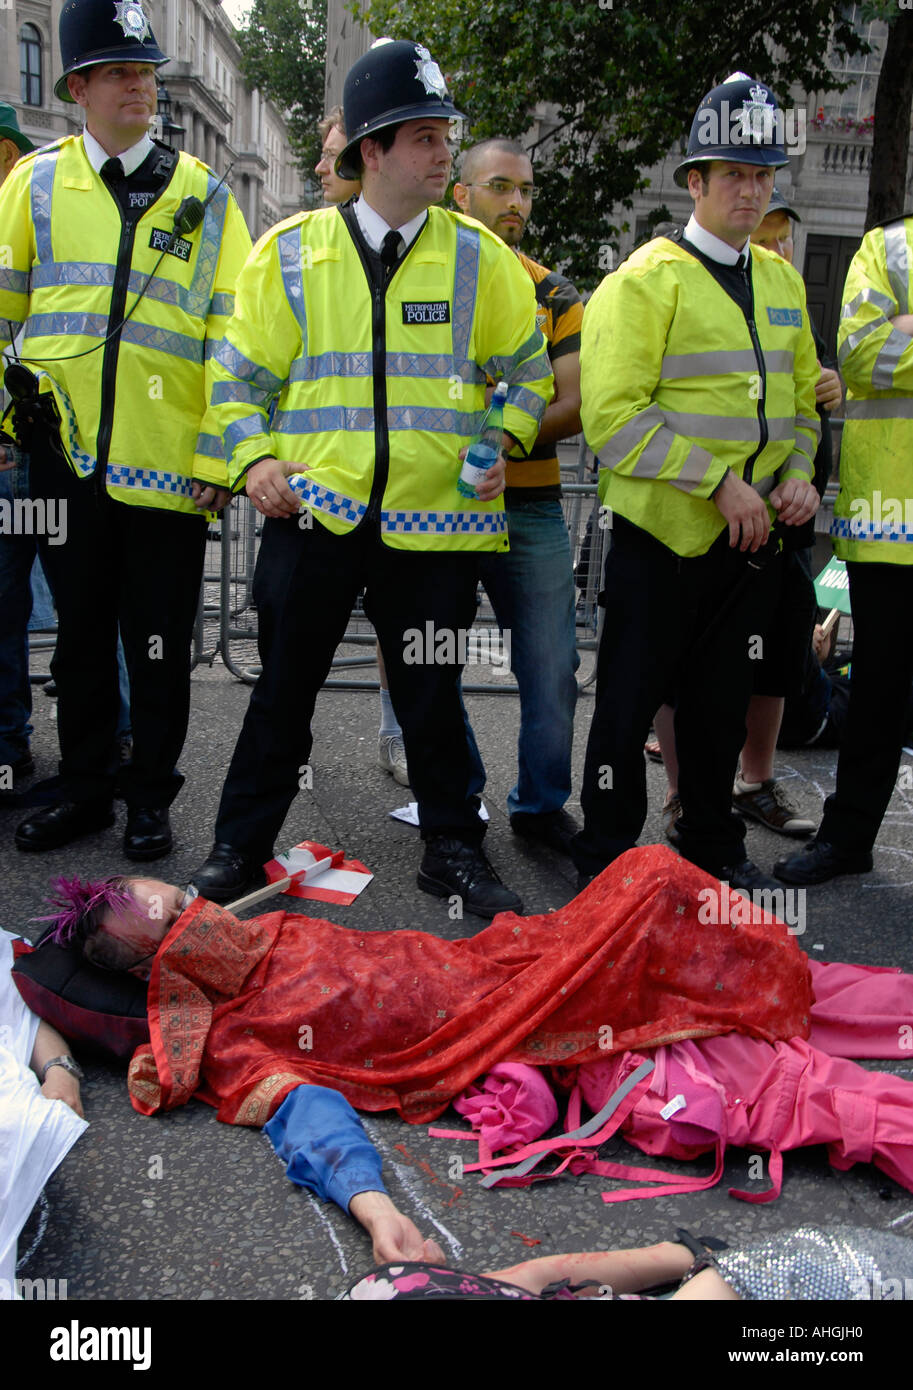 Lie down demonstration Downing Street Whitehall London when 100,000 people protest Israeli attack on Lebanon on August 5 2006. Stock Photo